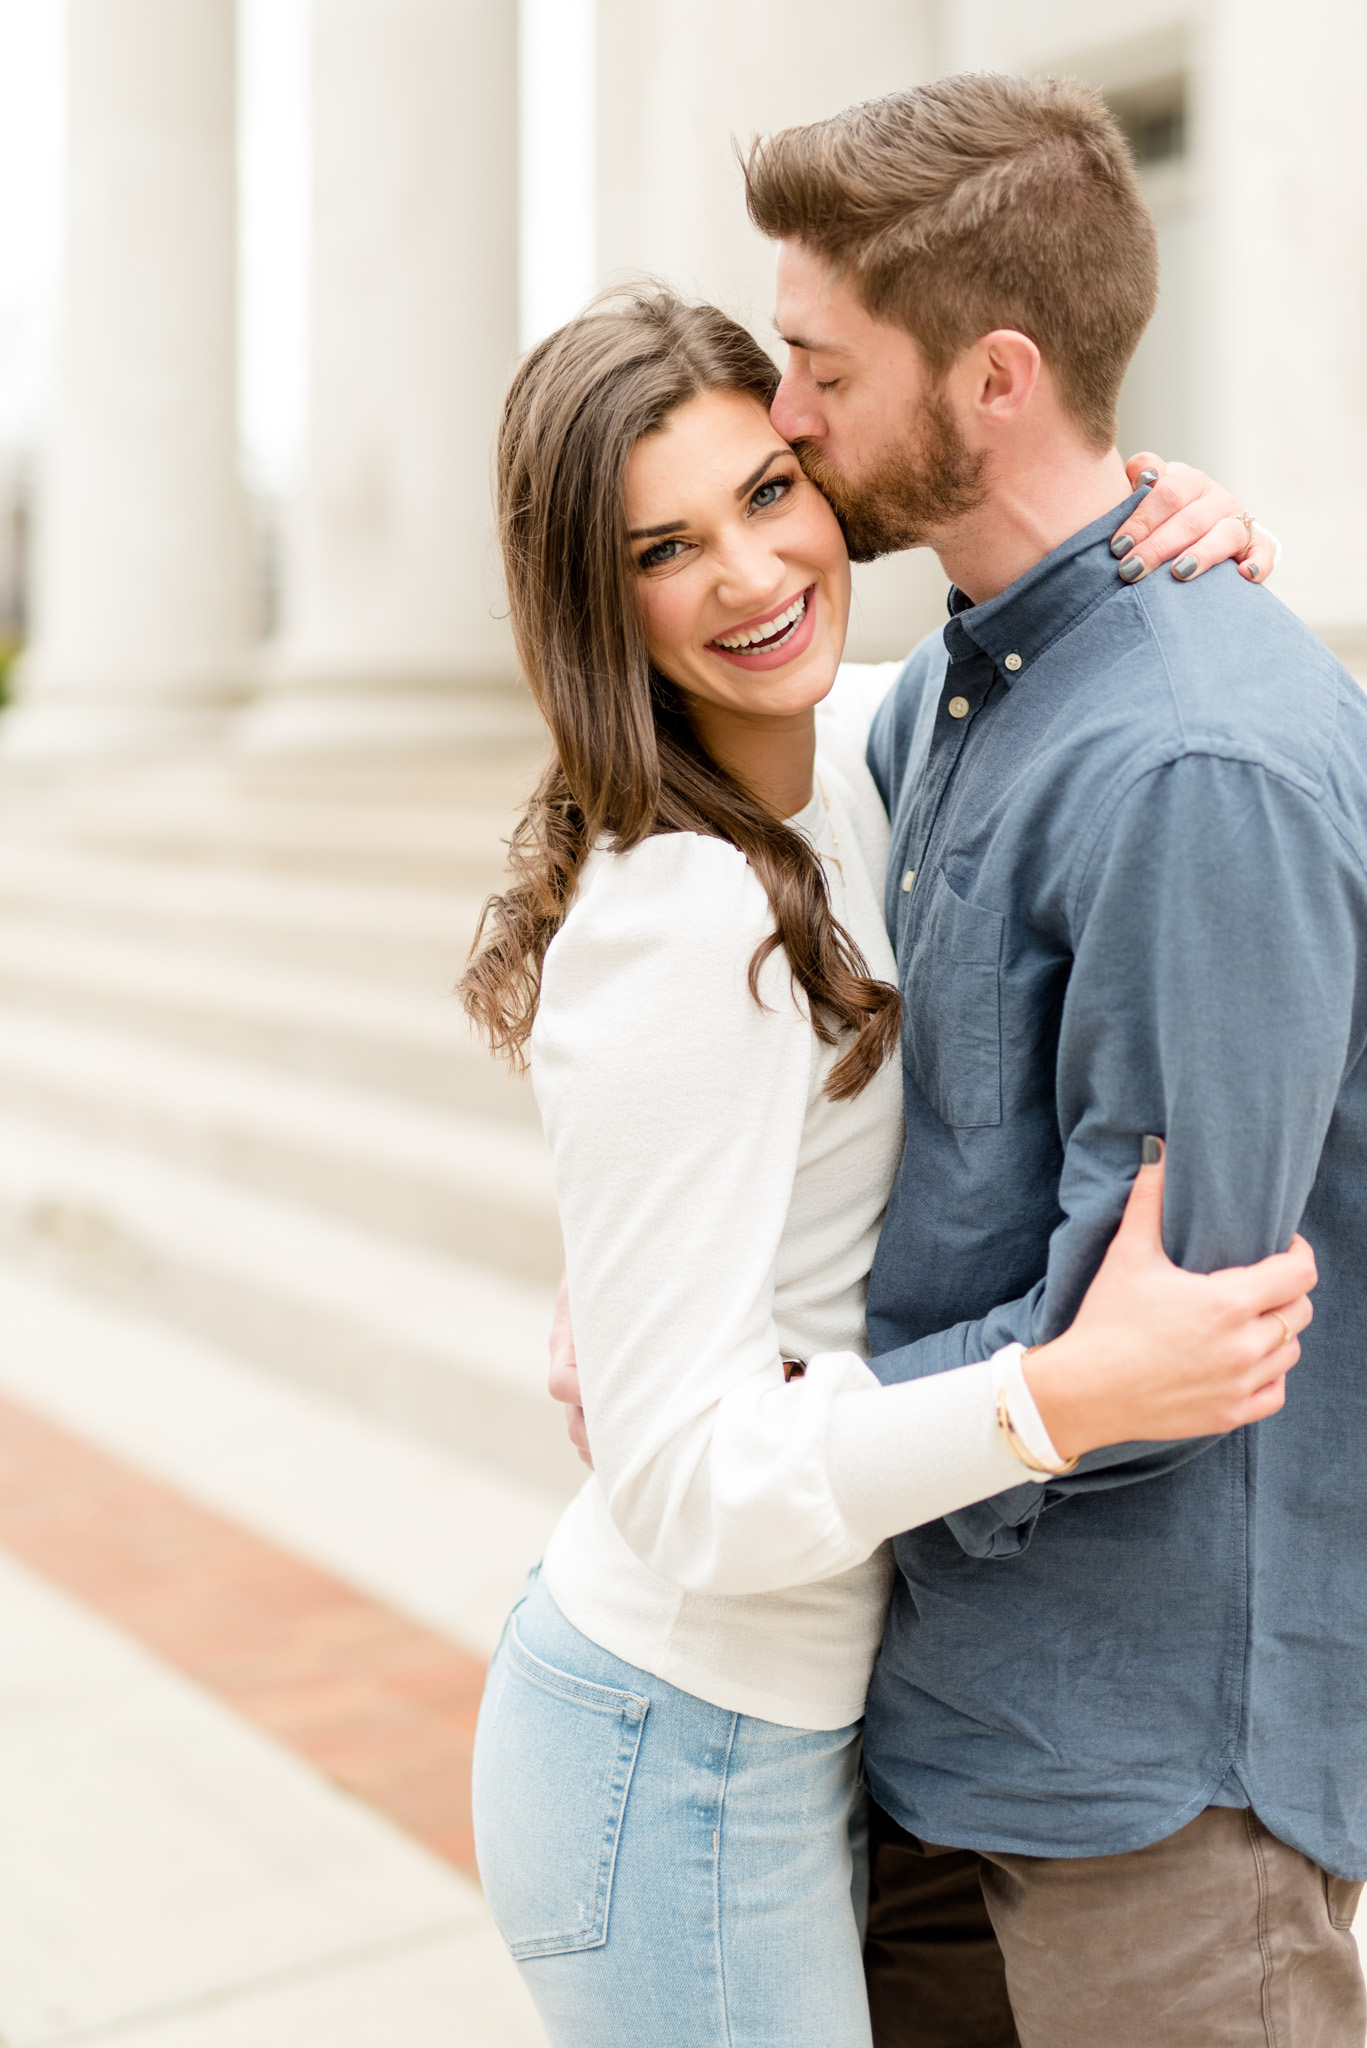 Woman smiles at camera while fiancé kisses her head.